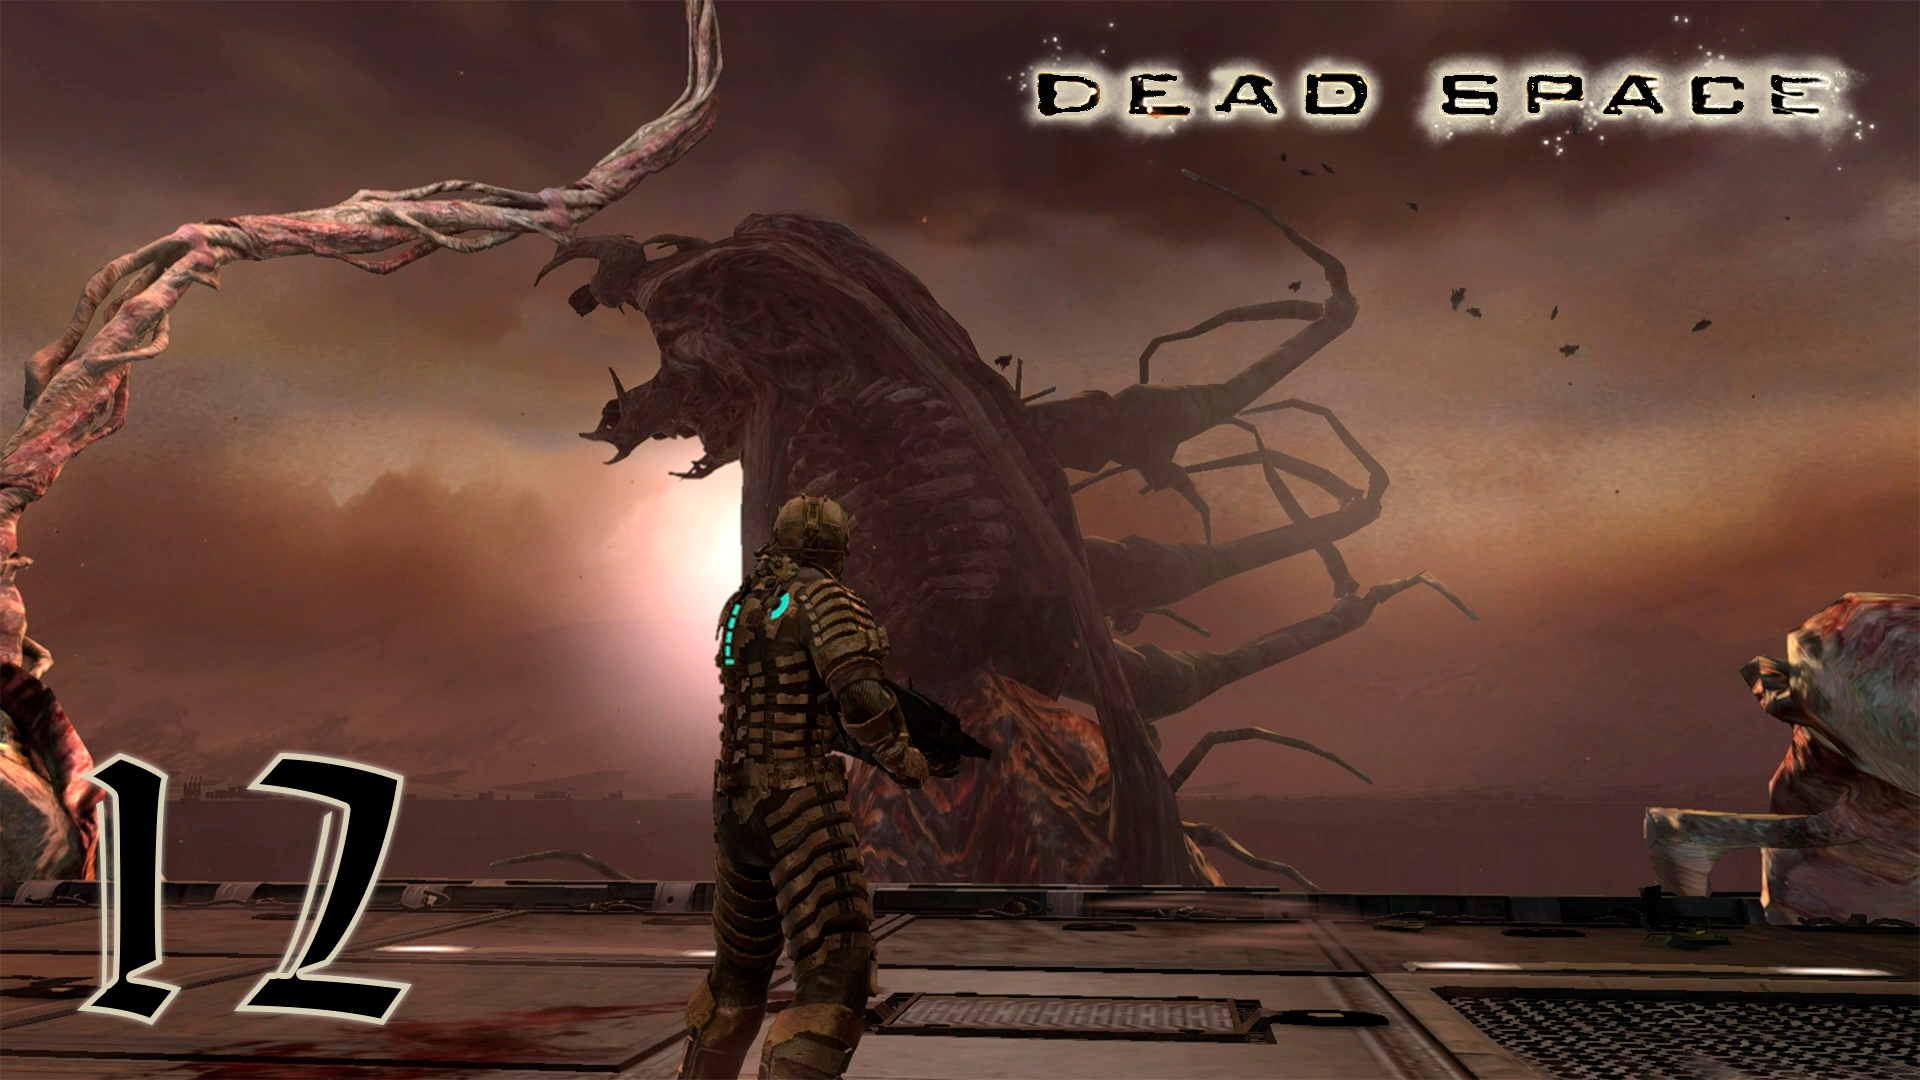 Dead space rig fallout 4 фото 106